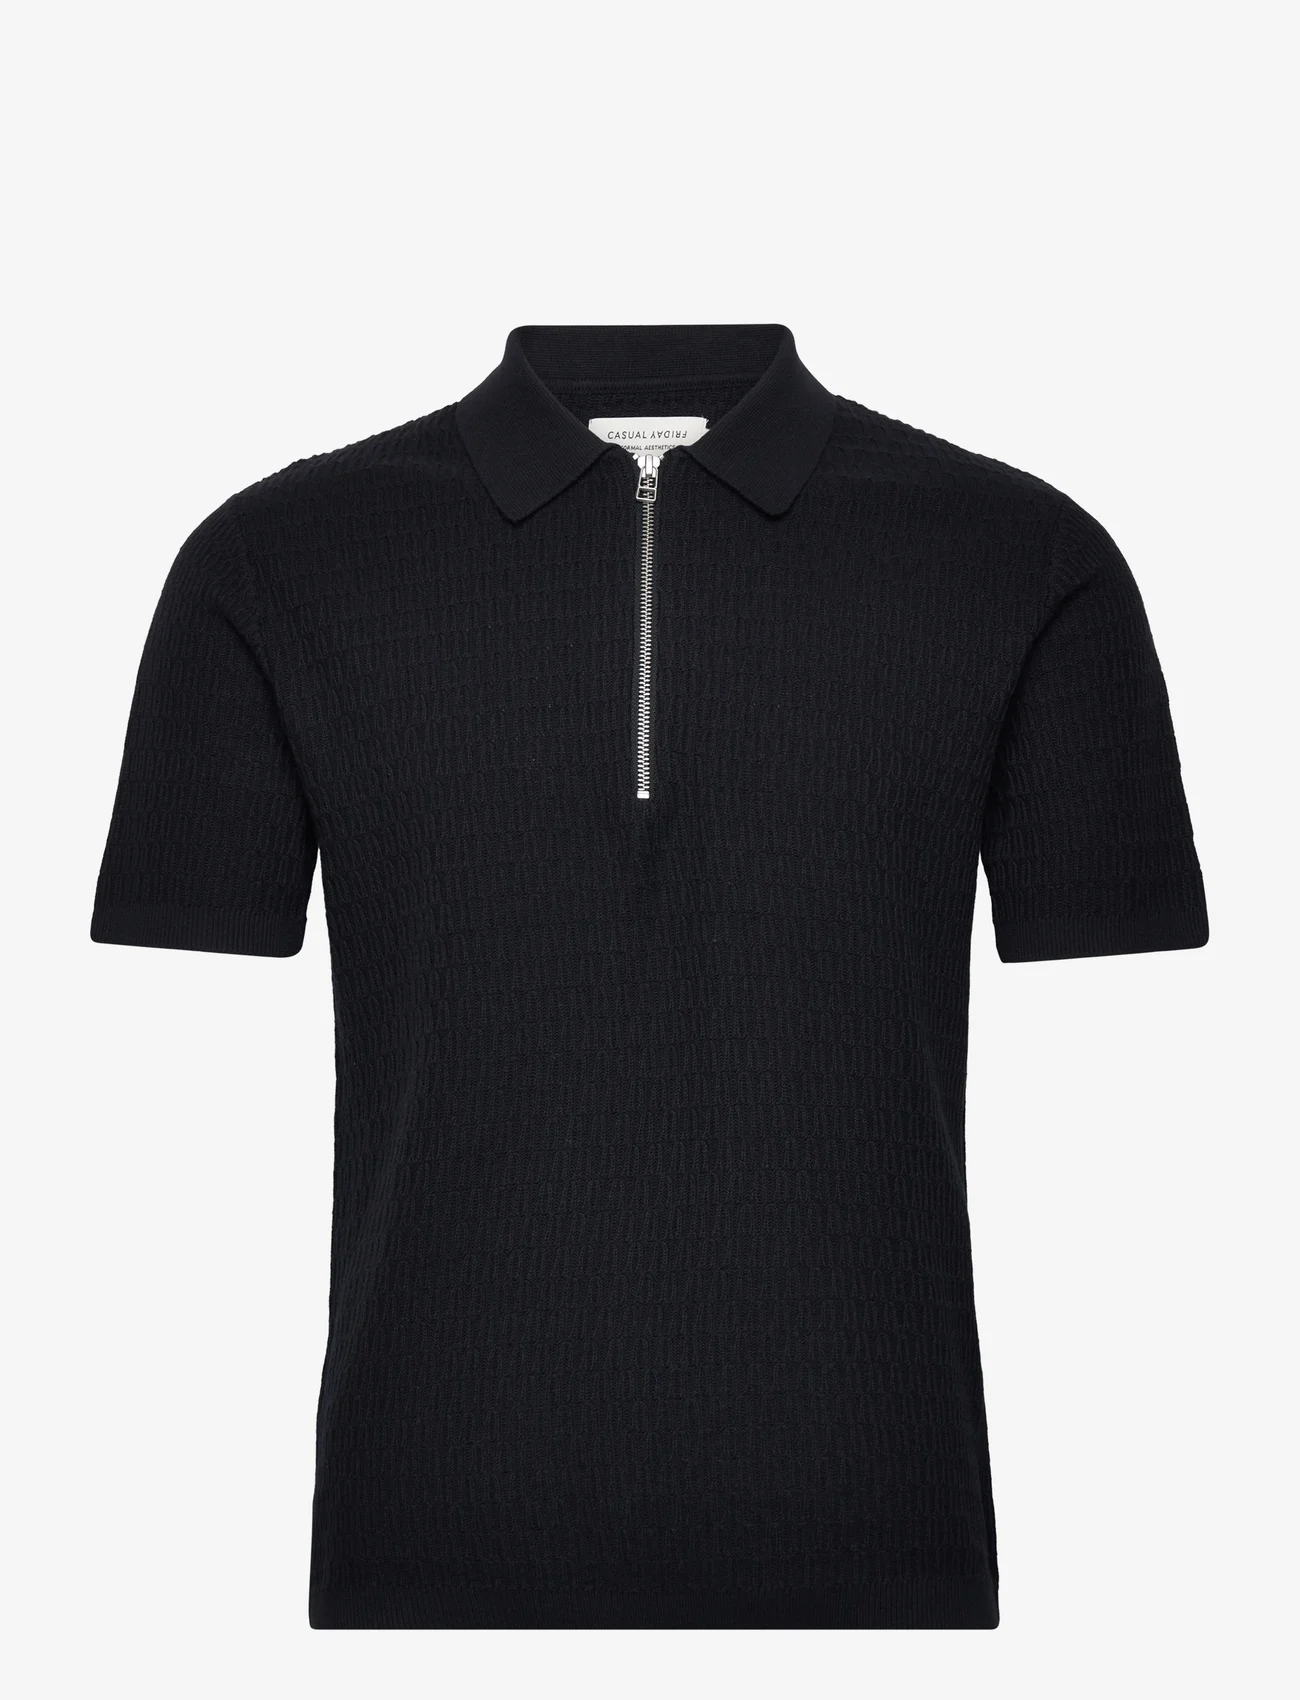 Casual Friday - CFKarl SS structured polo knit - men - dark navy - 0